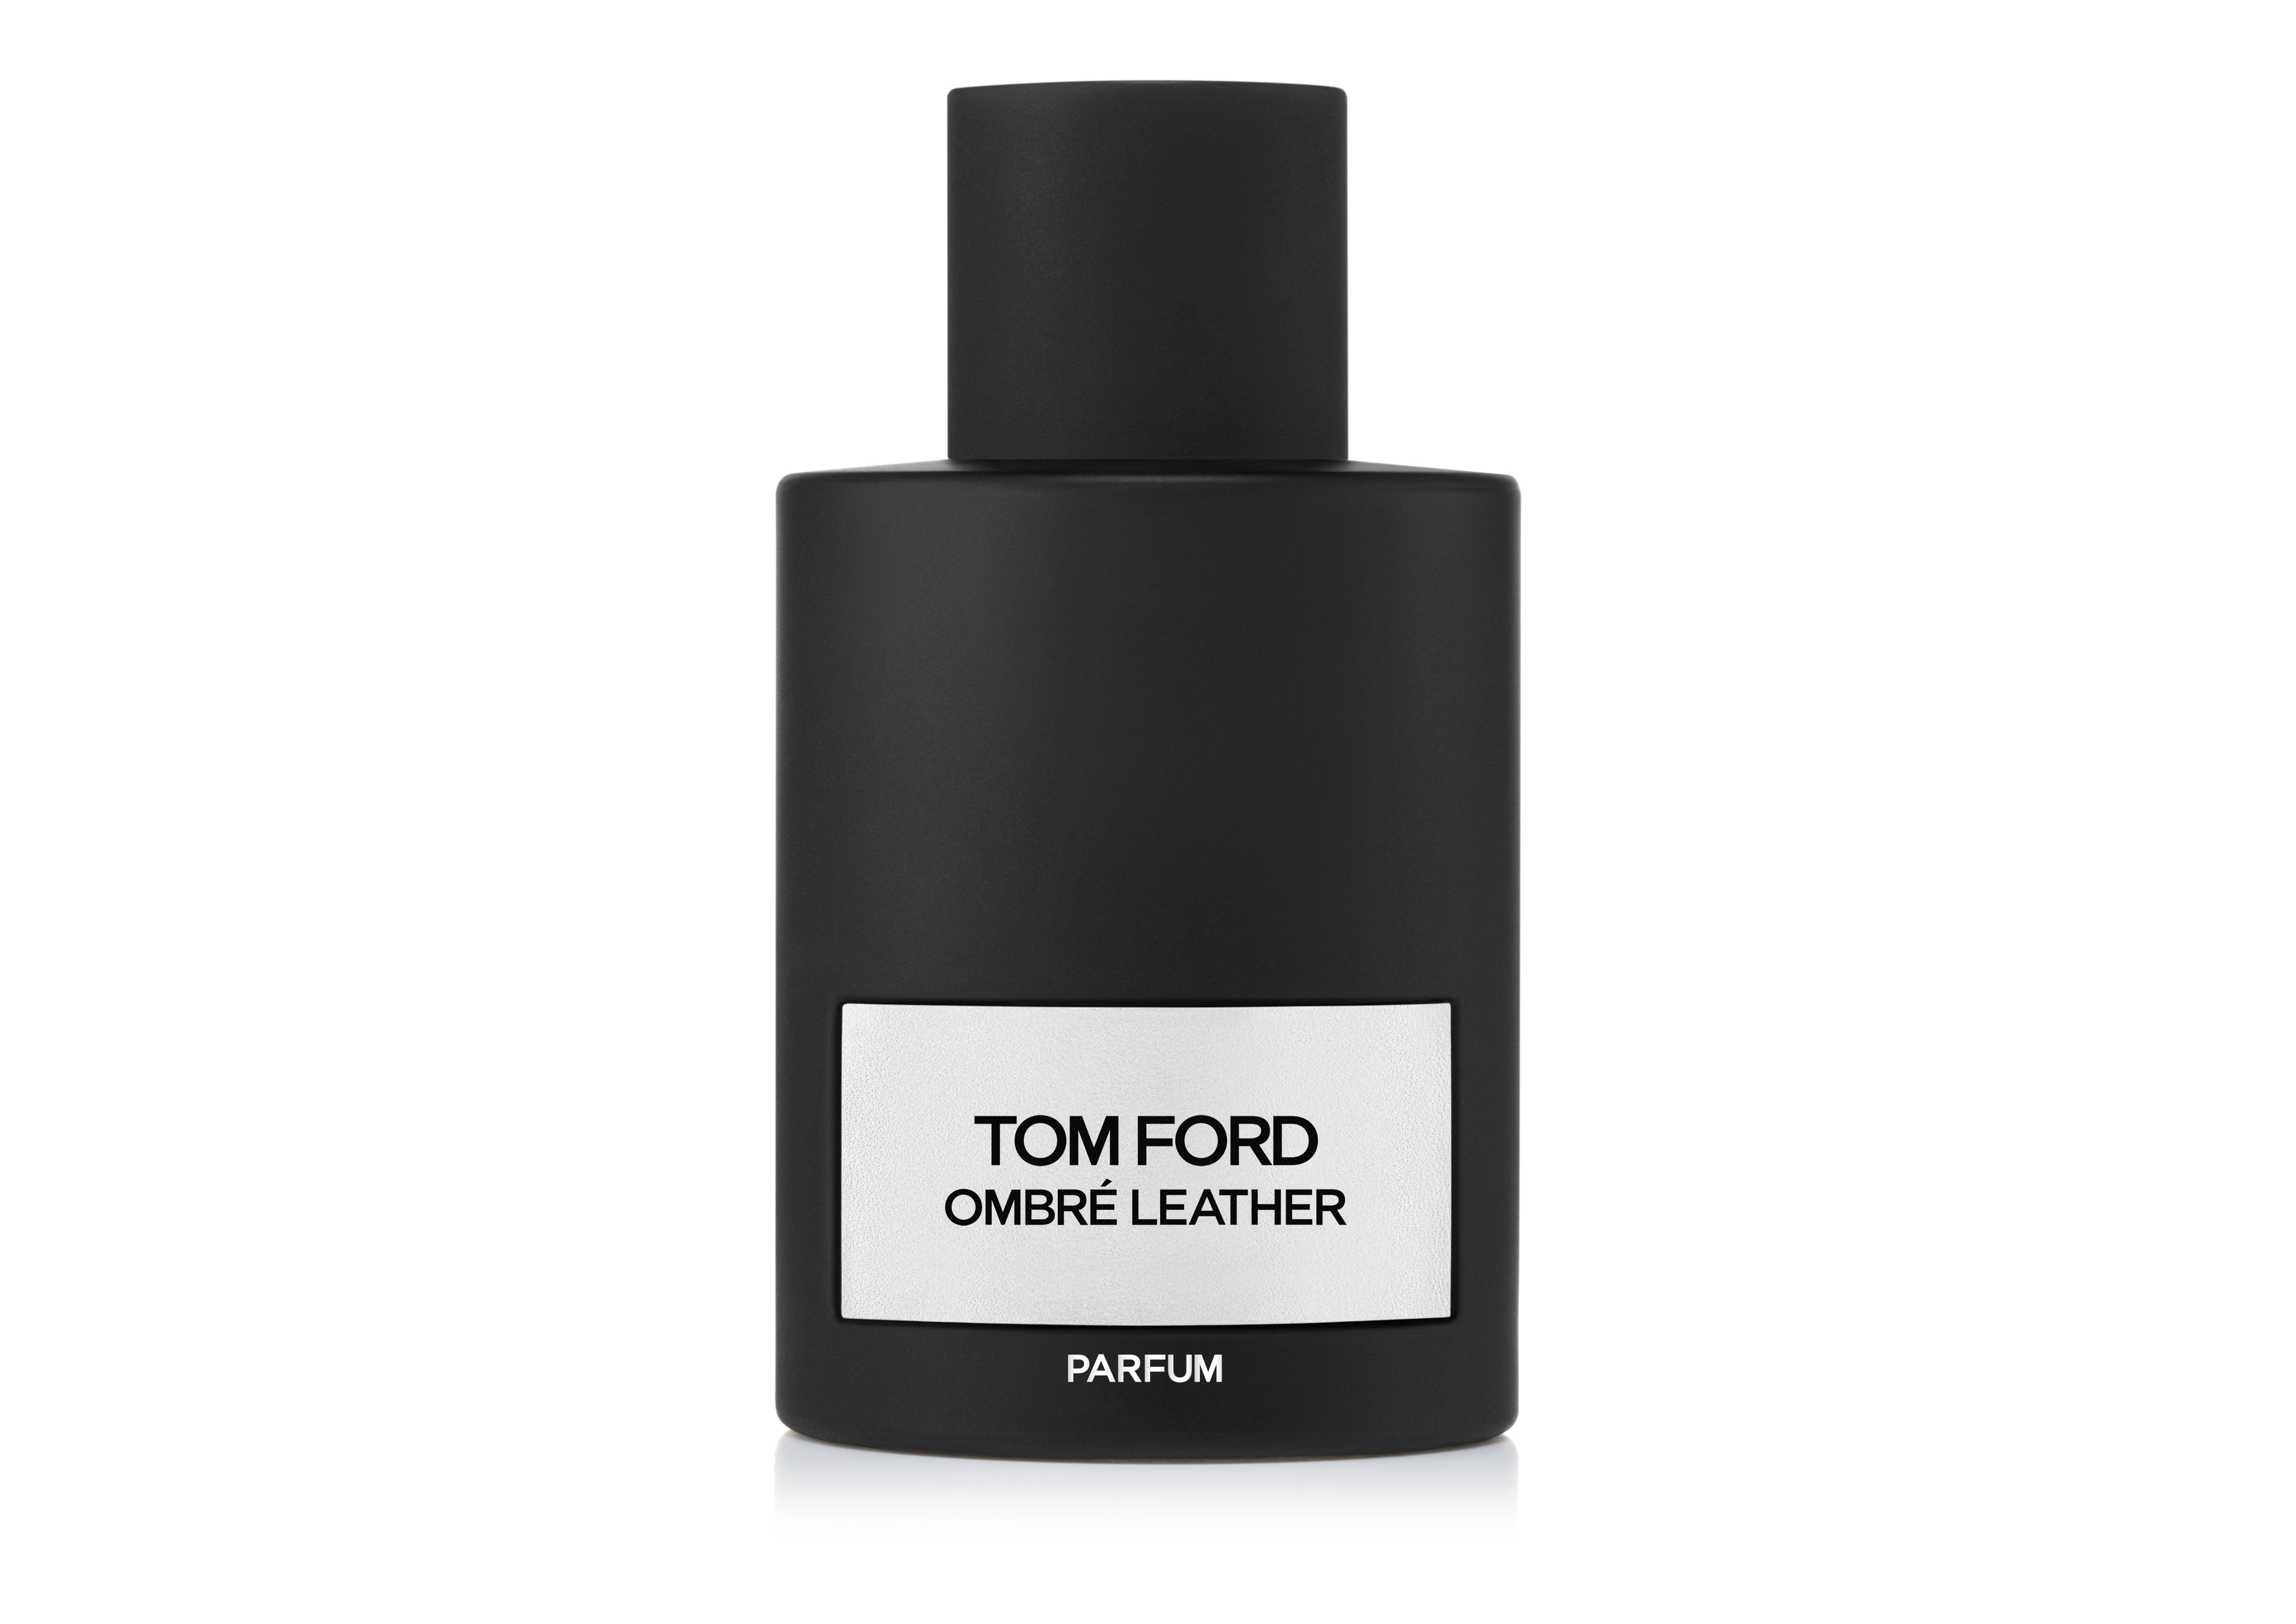 Tom Ford Beauty - Ombre Leather Parfum 100 ml, Black 1, large image number 0